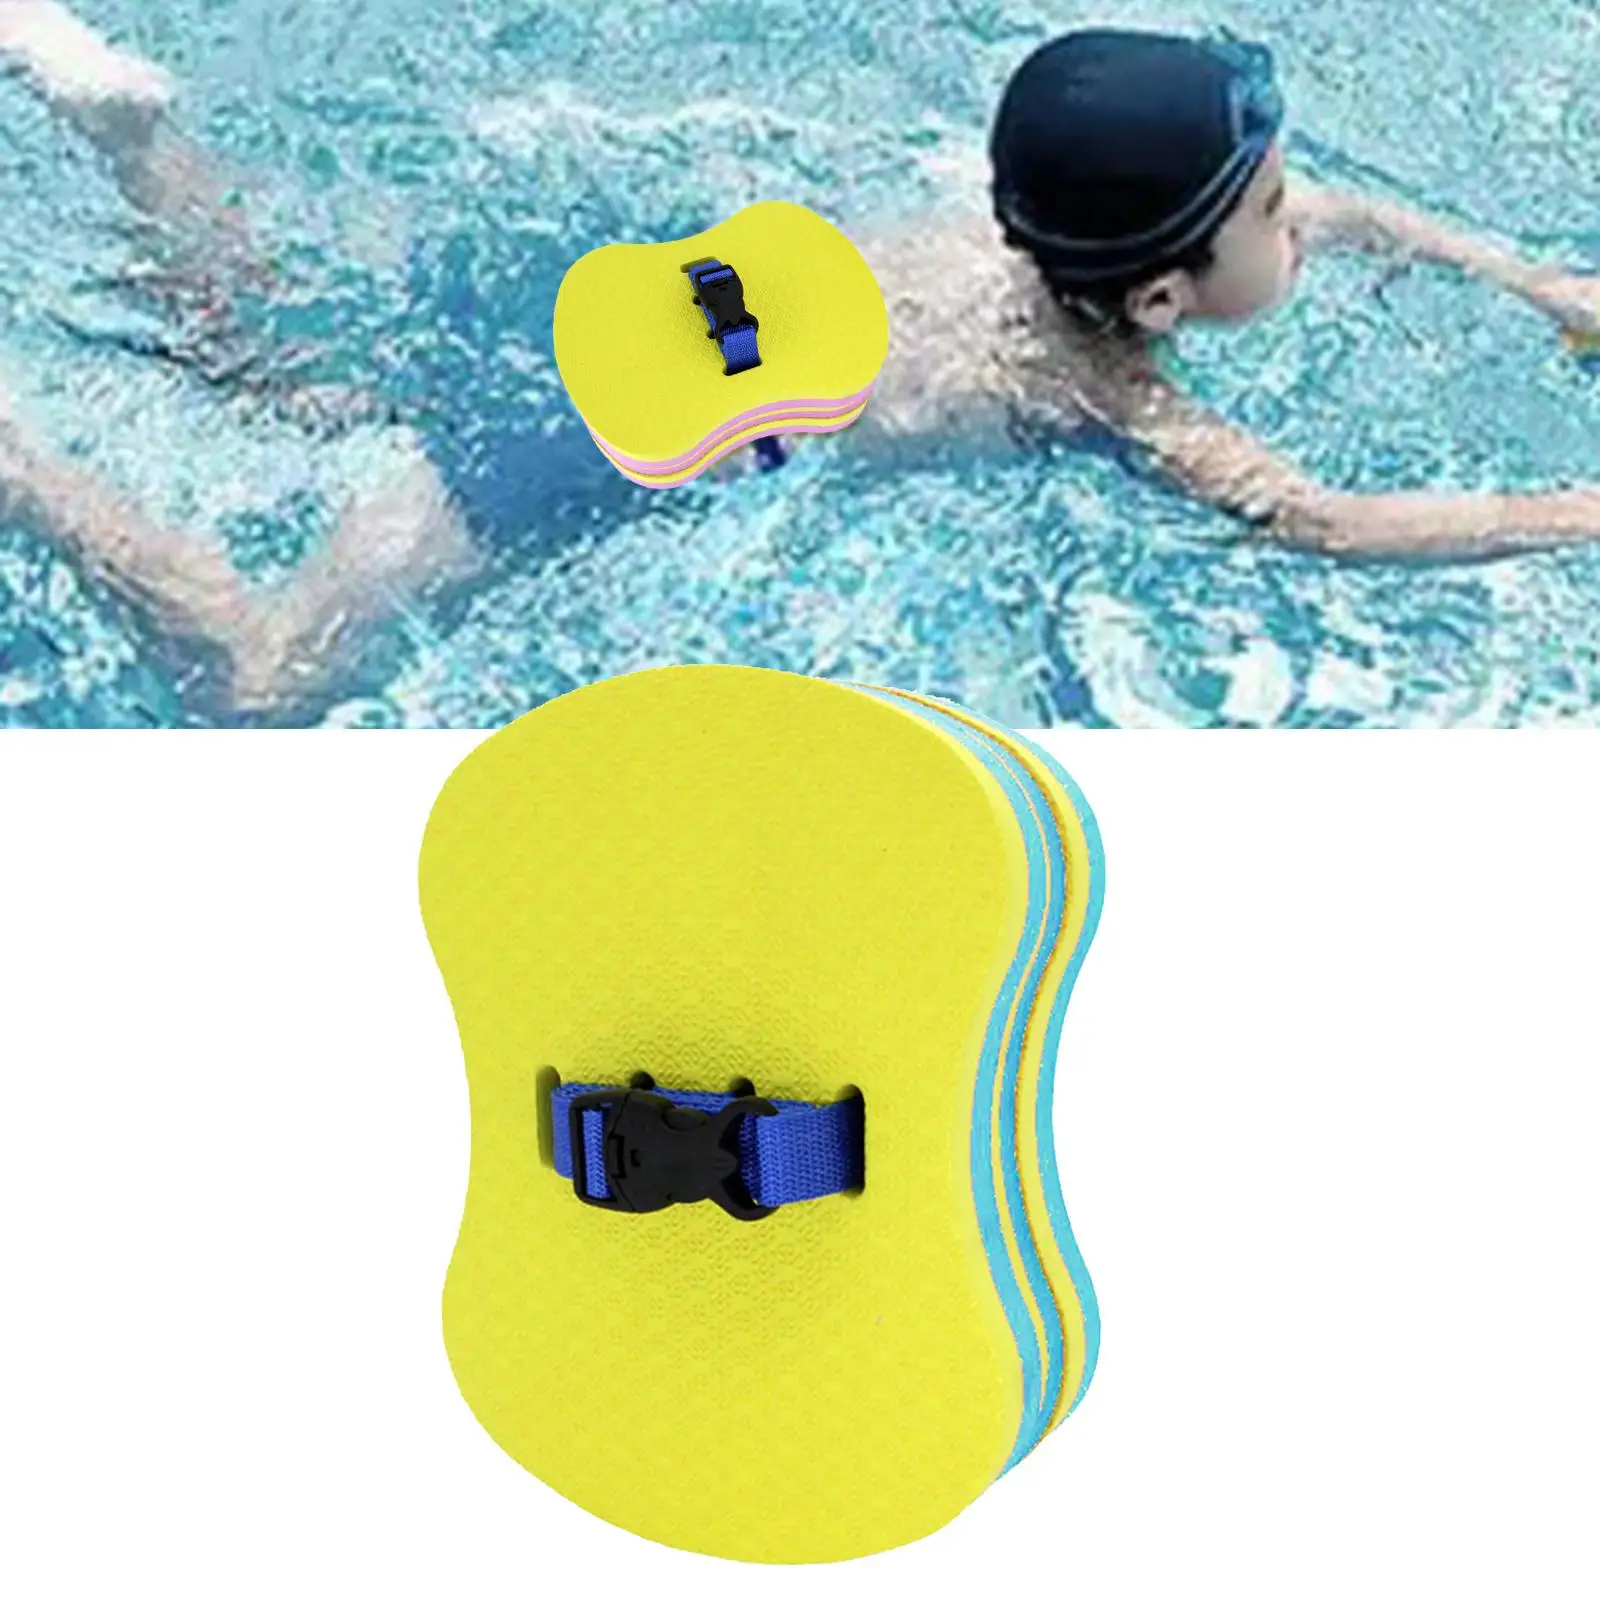 Adjustable Back Foam Floating Belt Waist for Children and Adults Beginners Advanced Swimmers Exercise Training Pool Accessories